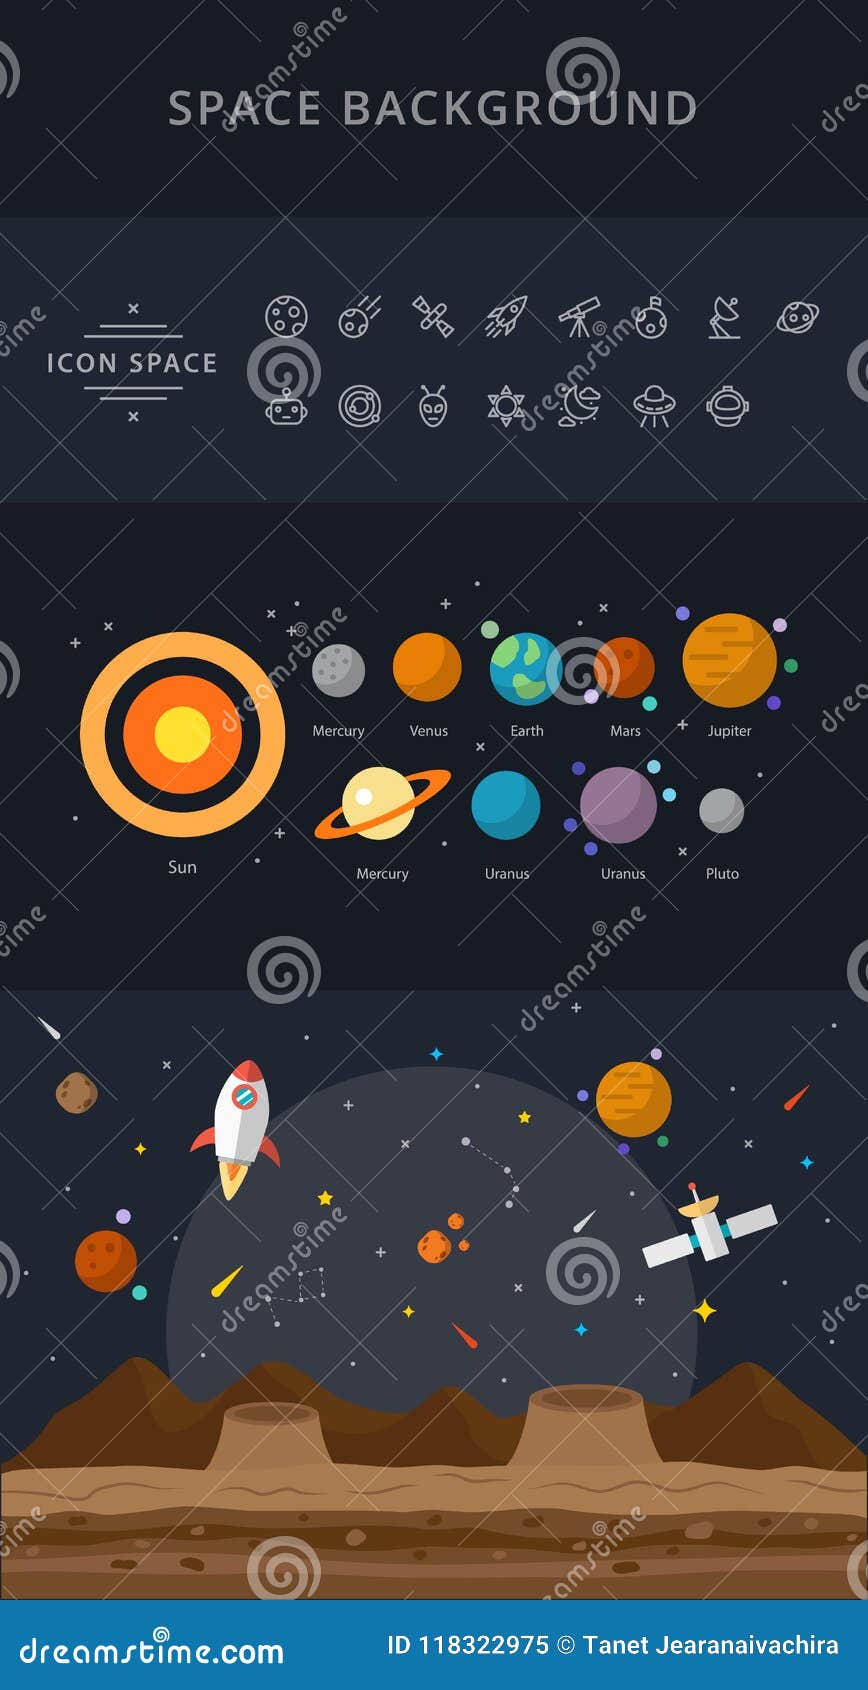 space flat icons blue - 